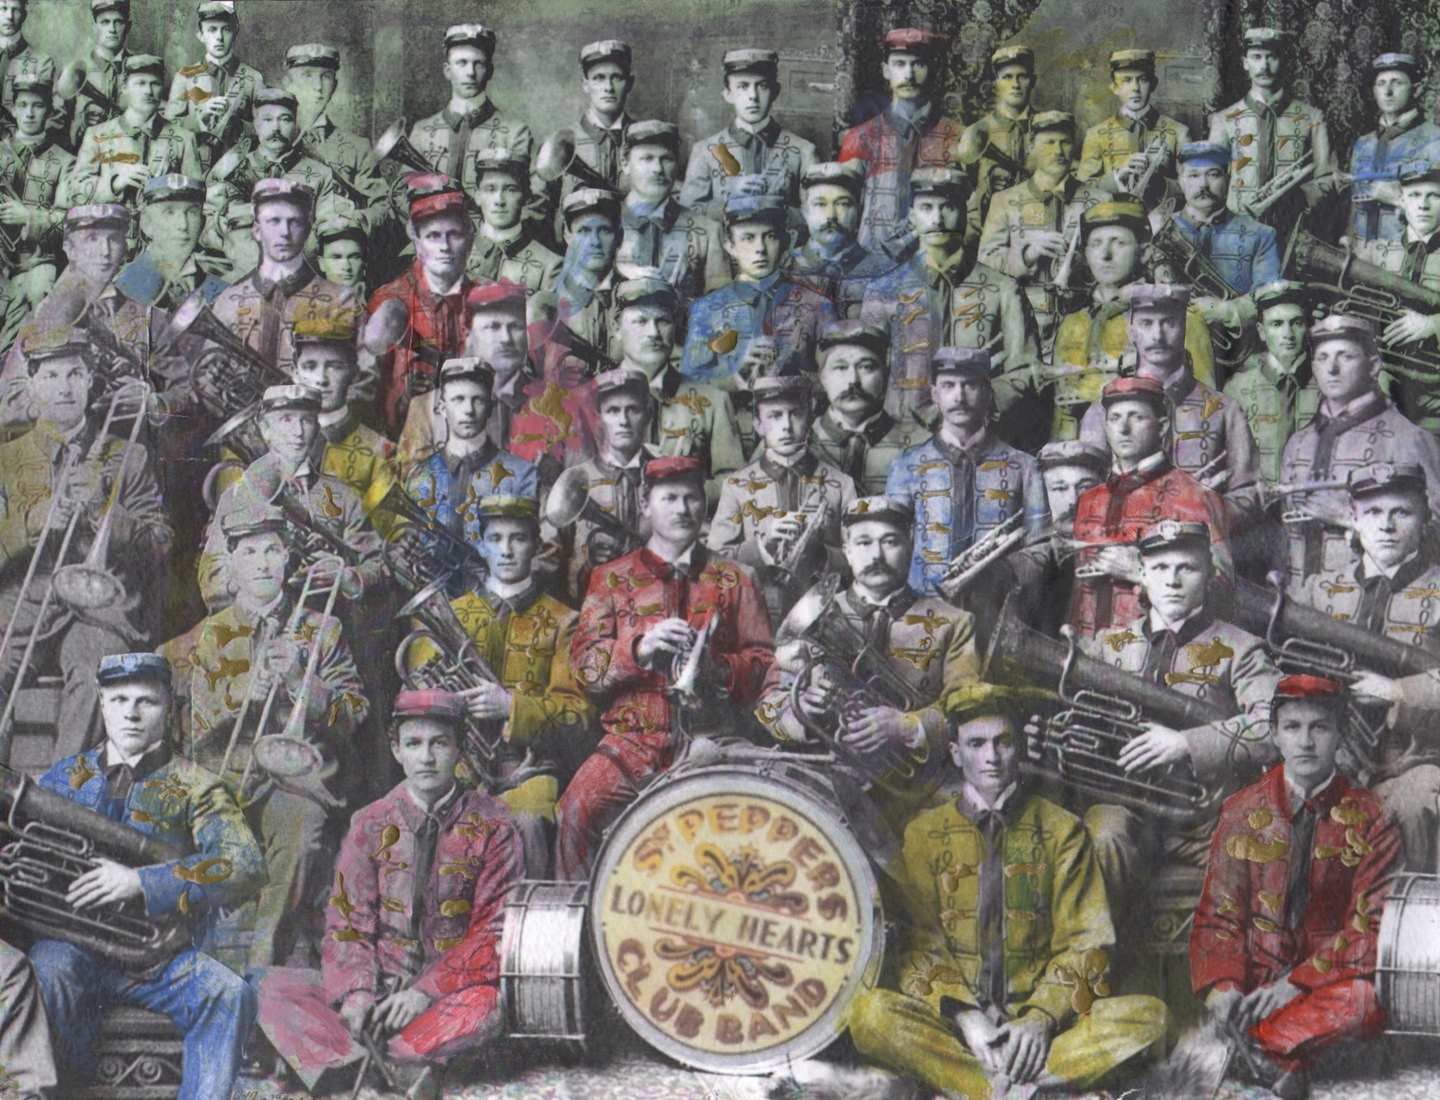 Sgt. Pepper's lonely hearts Club band